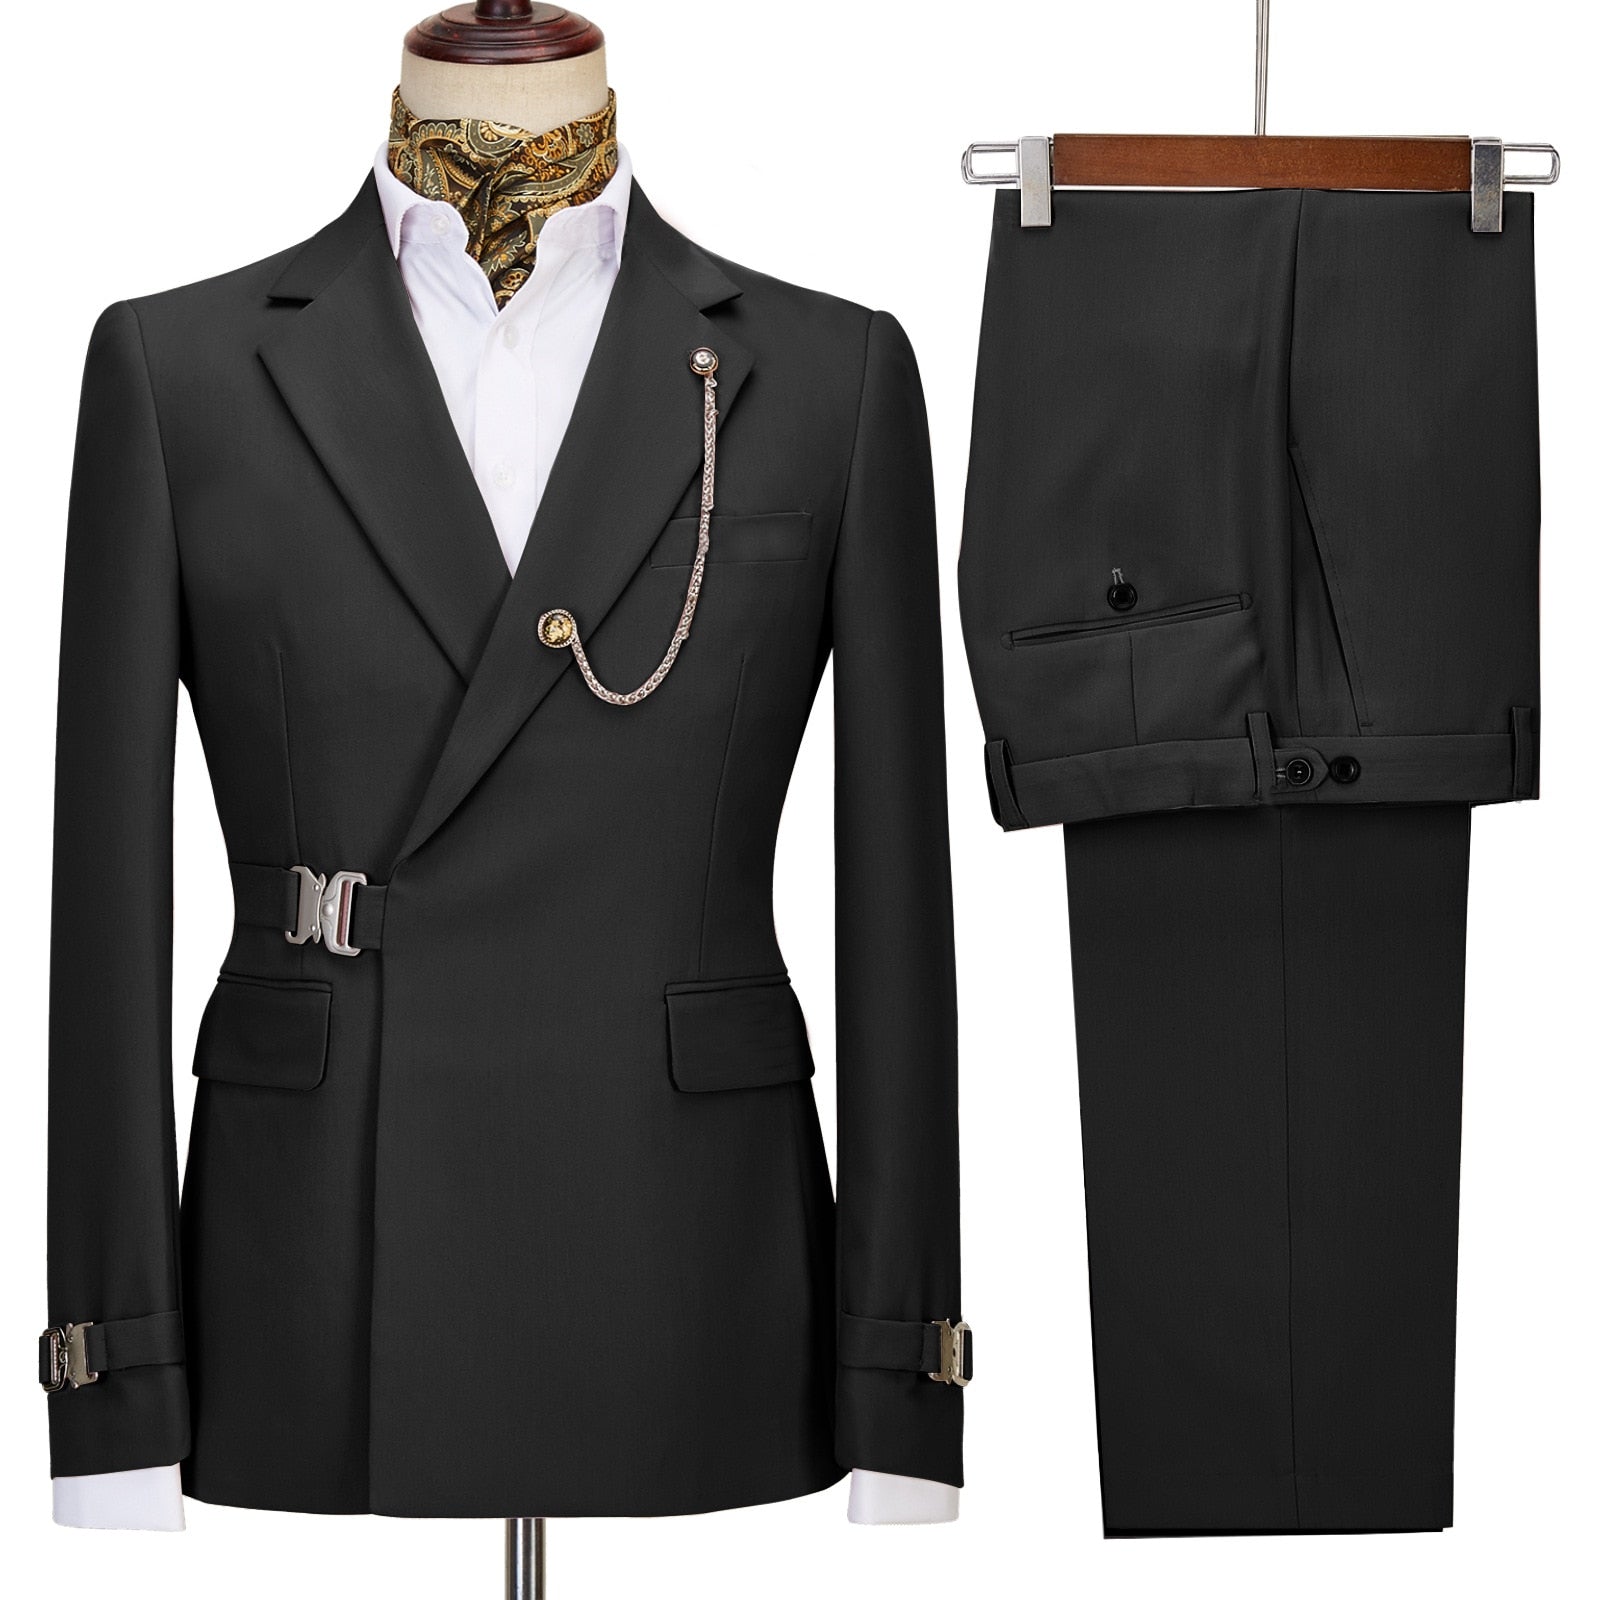 New Casual Men's Suit Slim Two-piece Business Korean Version of The Groom and Best Man Wedding Dress